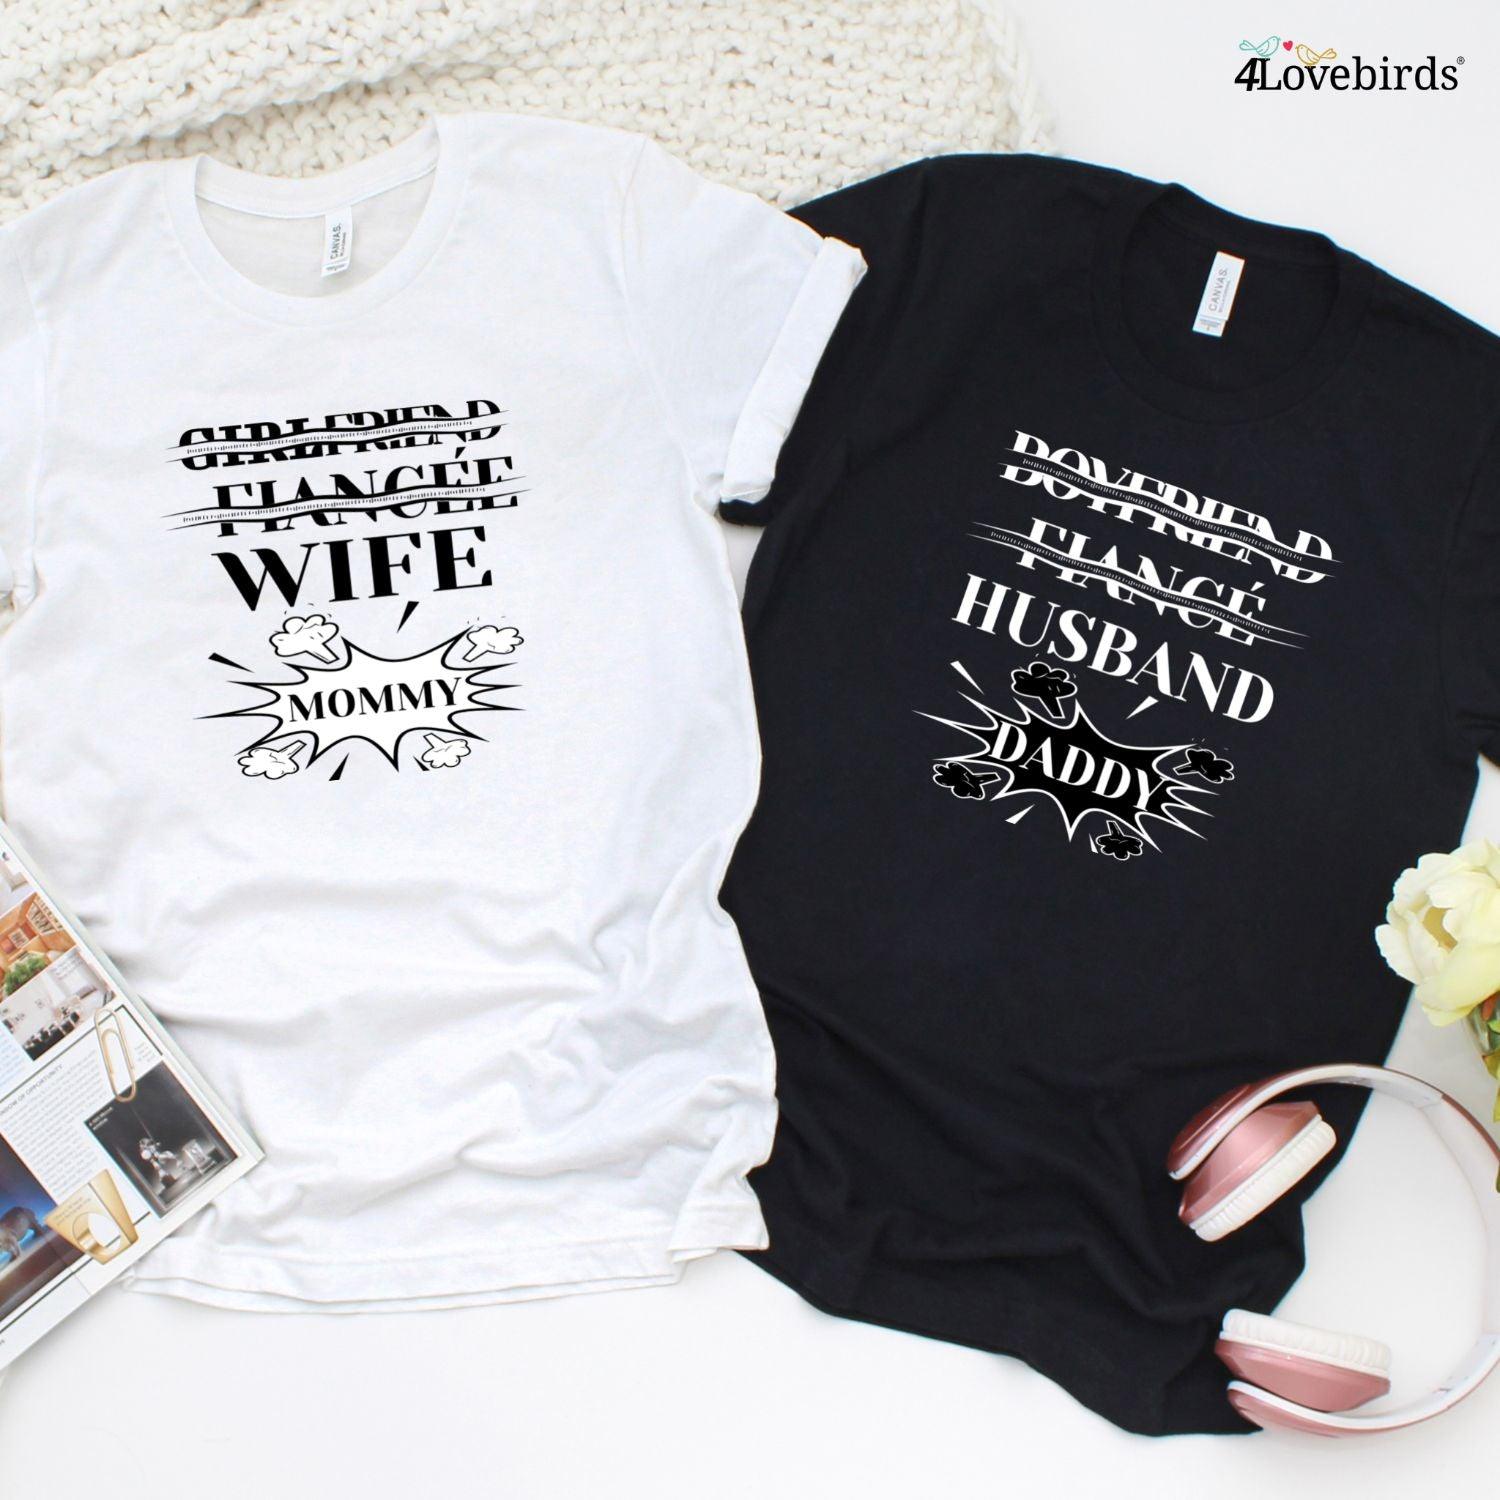 Matching Set for Mommy, Daddy, Husband and Wife - Perfect Outfit Pairings - 4Lovebirds